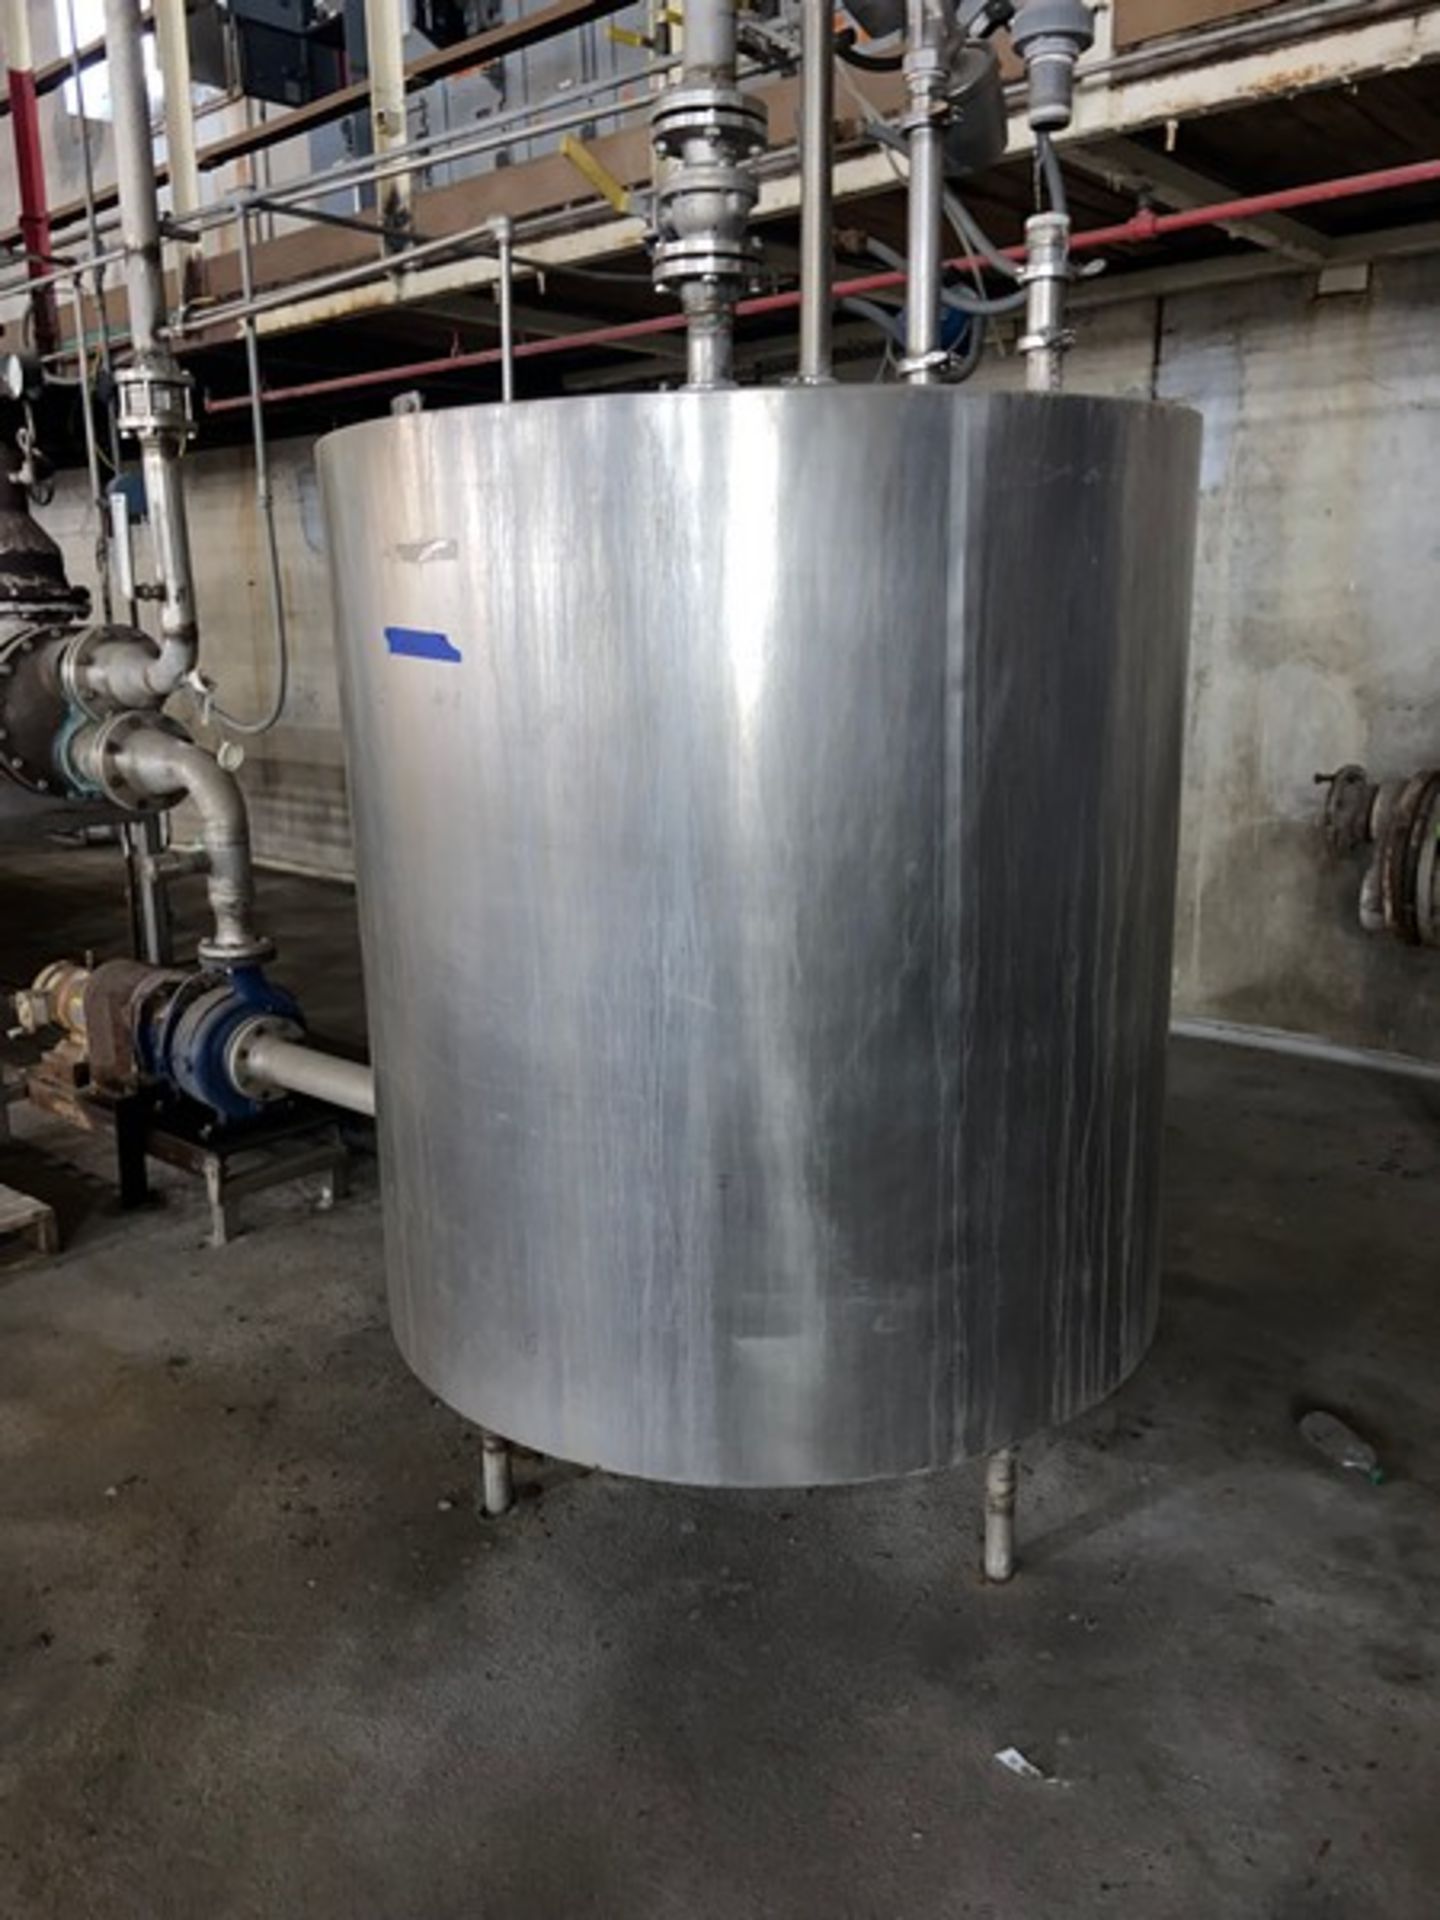 Damrow Bros. 400 Gal. S/S Vertical Insulated Tank, S/N 25609, with S/S Hinge Lid, Mounted on S/S - Image 10 of 16